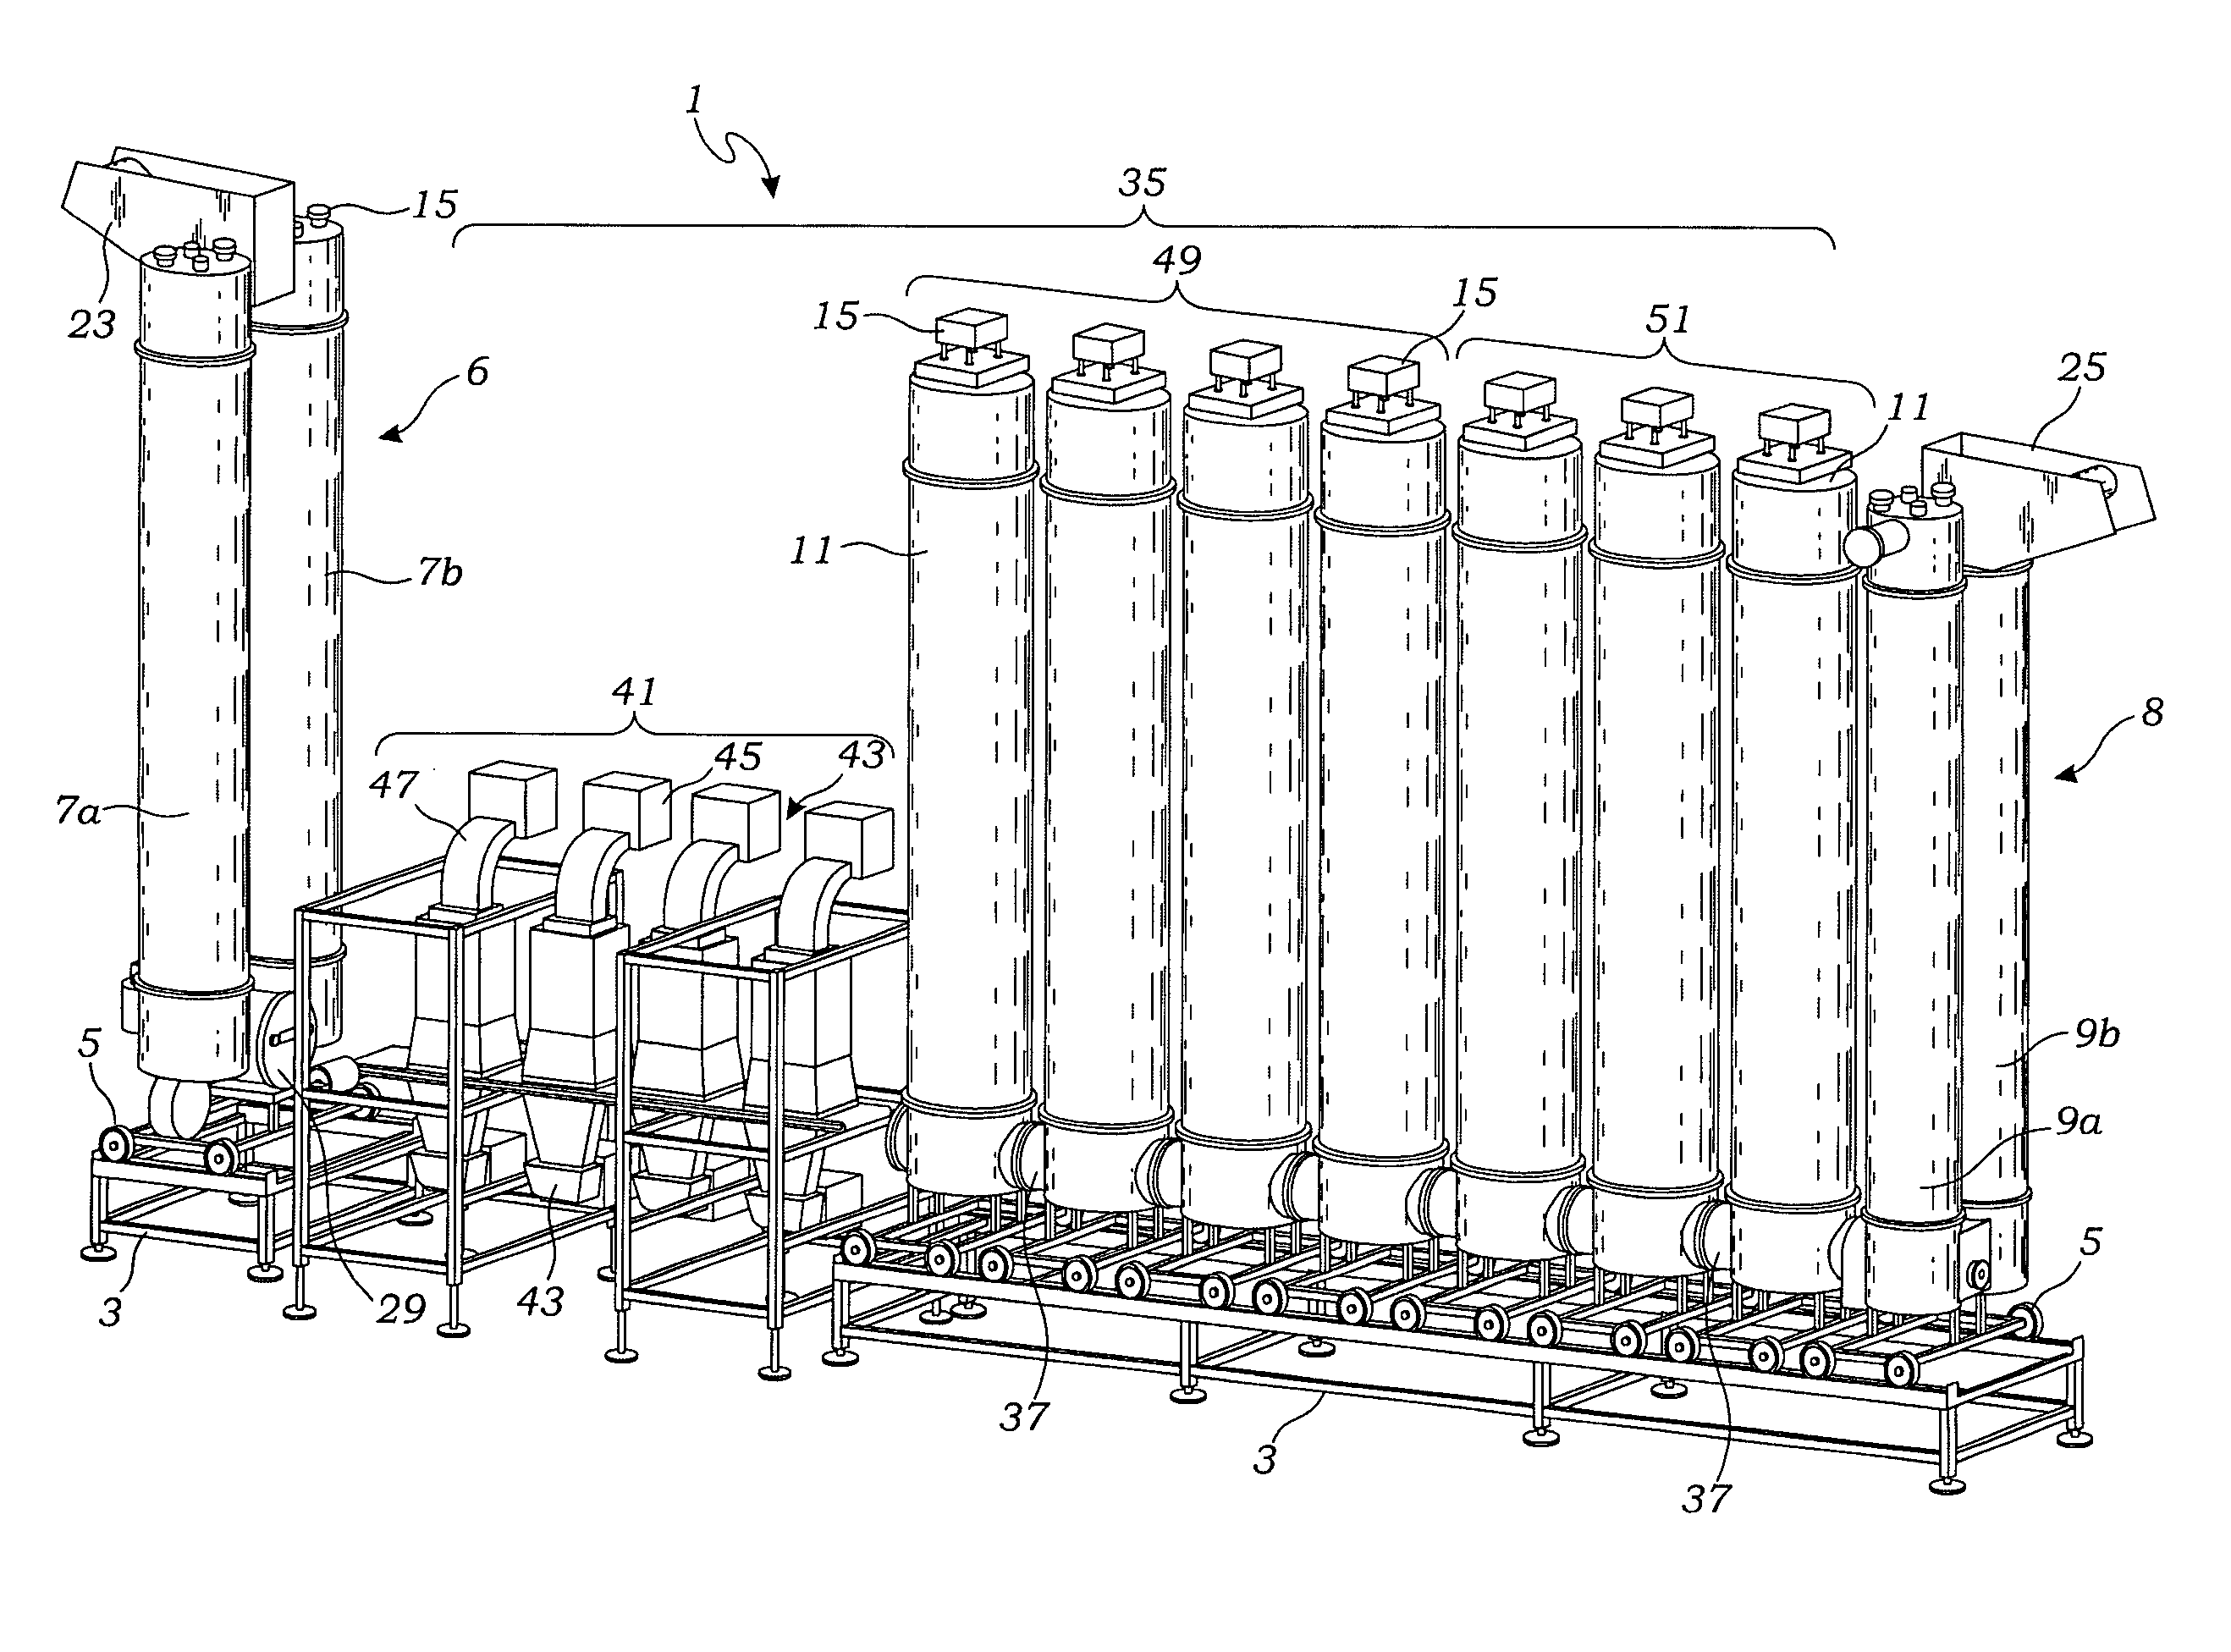 Apparatus and method for mass sterilization and pasteurization of food products